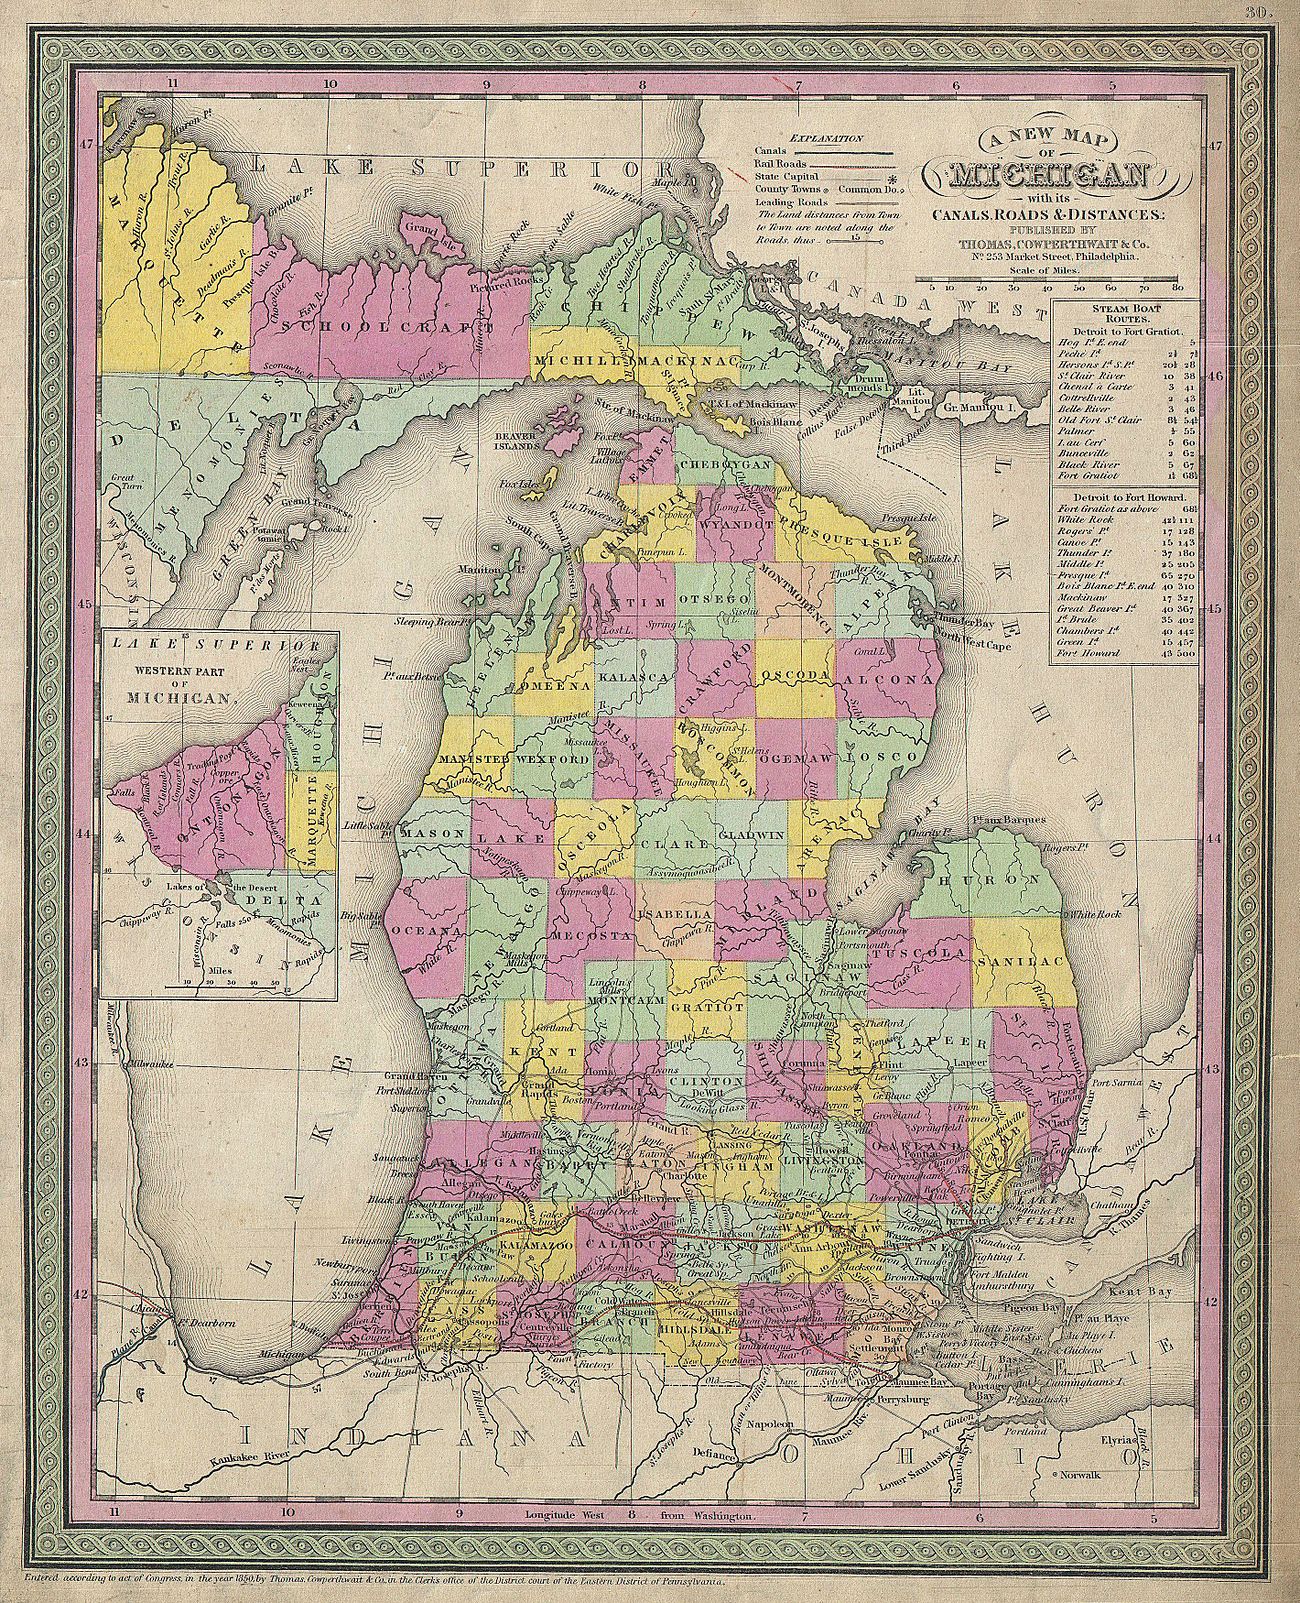 As settlers arrived between 1840 and 1853, the state broke up the single Michilimackinac County and established platted counties across Northern Michigan. This 1853 map by S. A. Mitchell shows an improved understanding of the contours and inland lakes and streams of Northern Michigan based on recent land surveys.